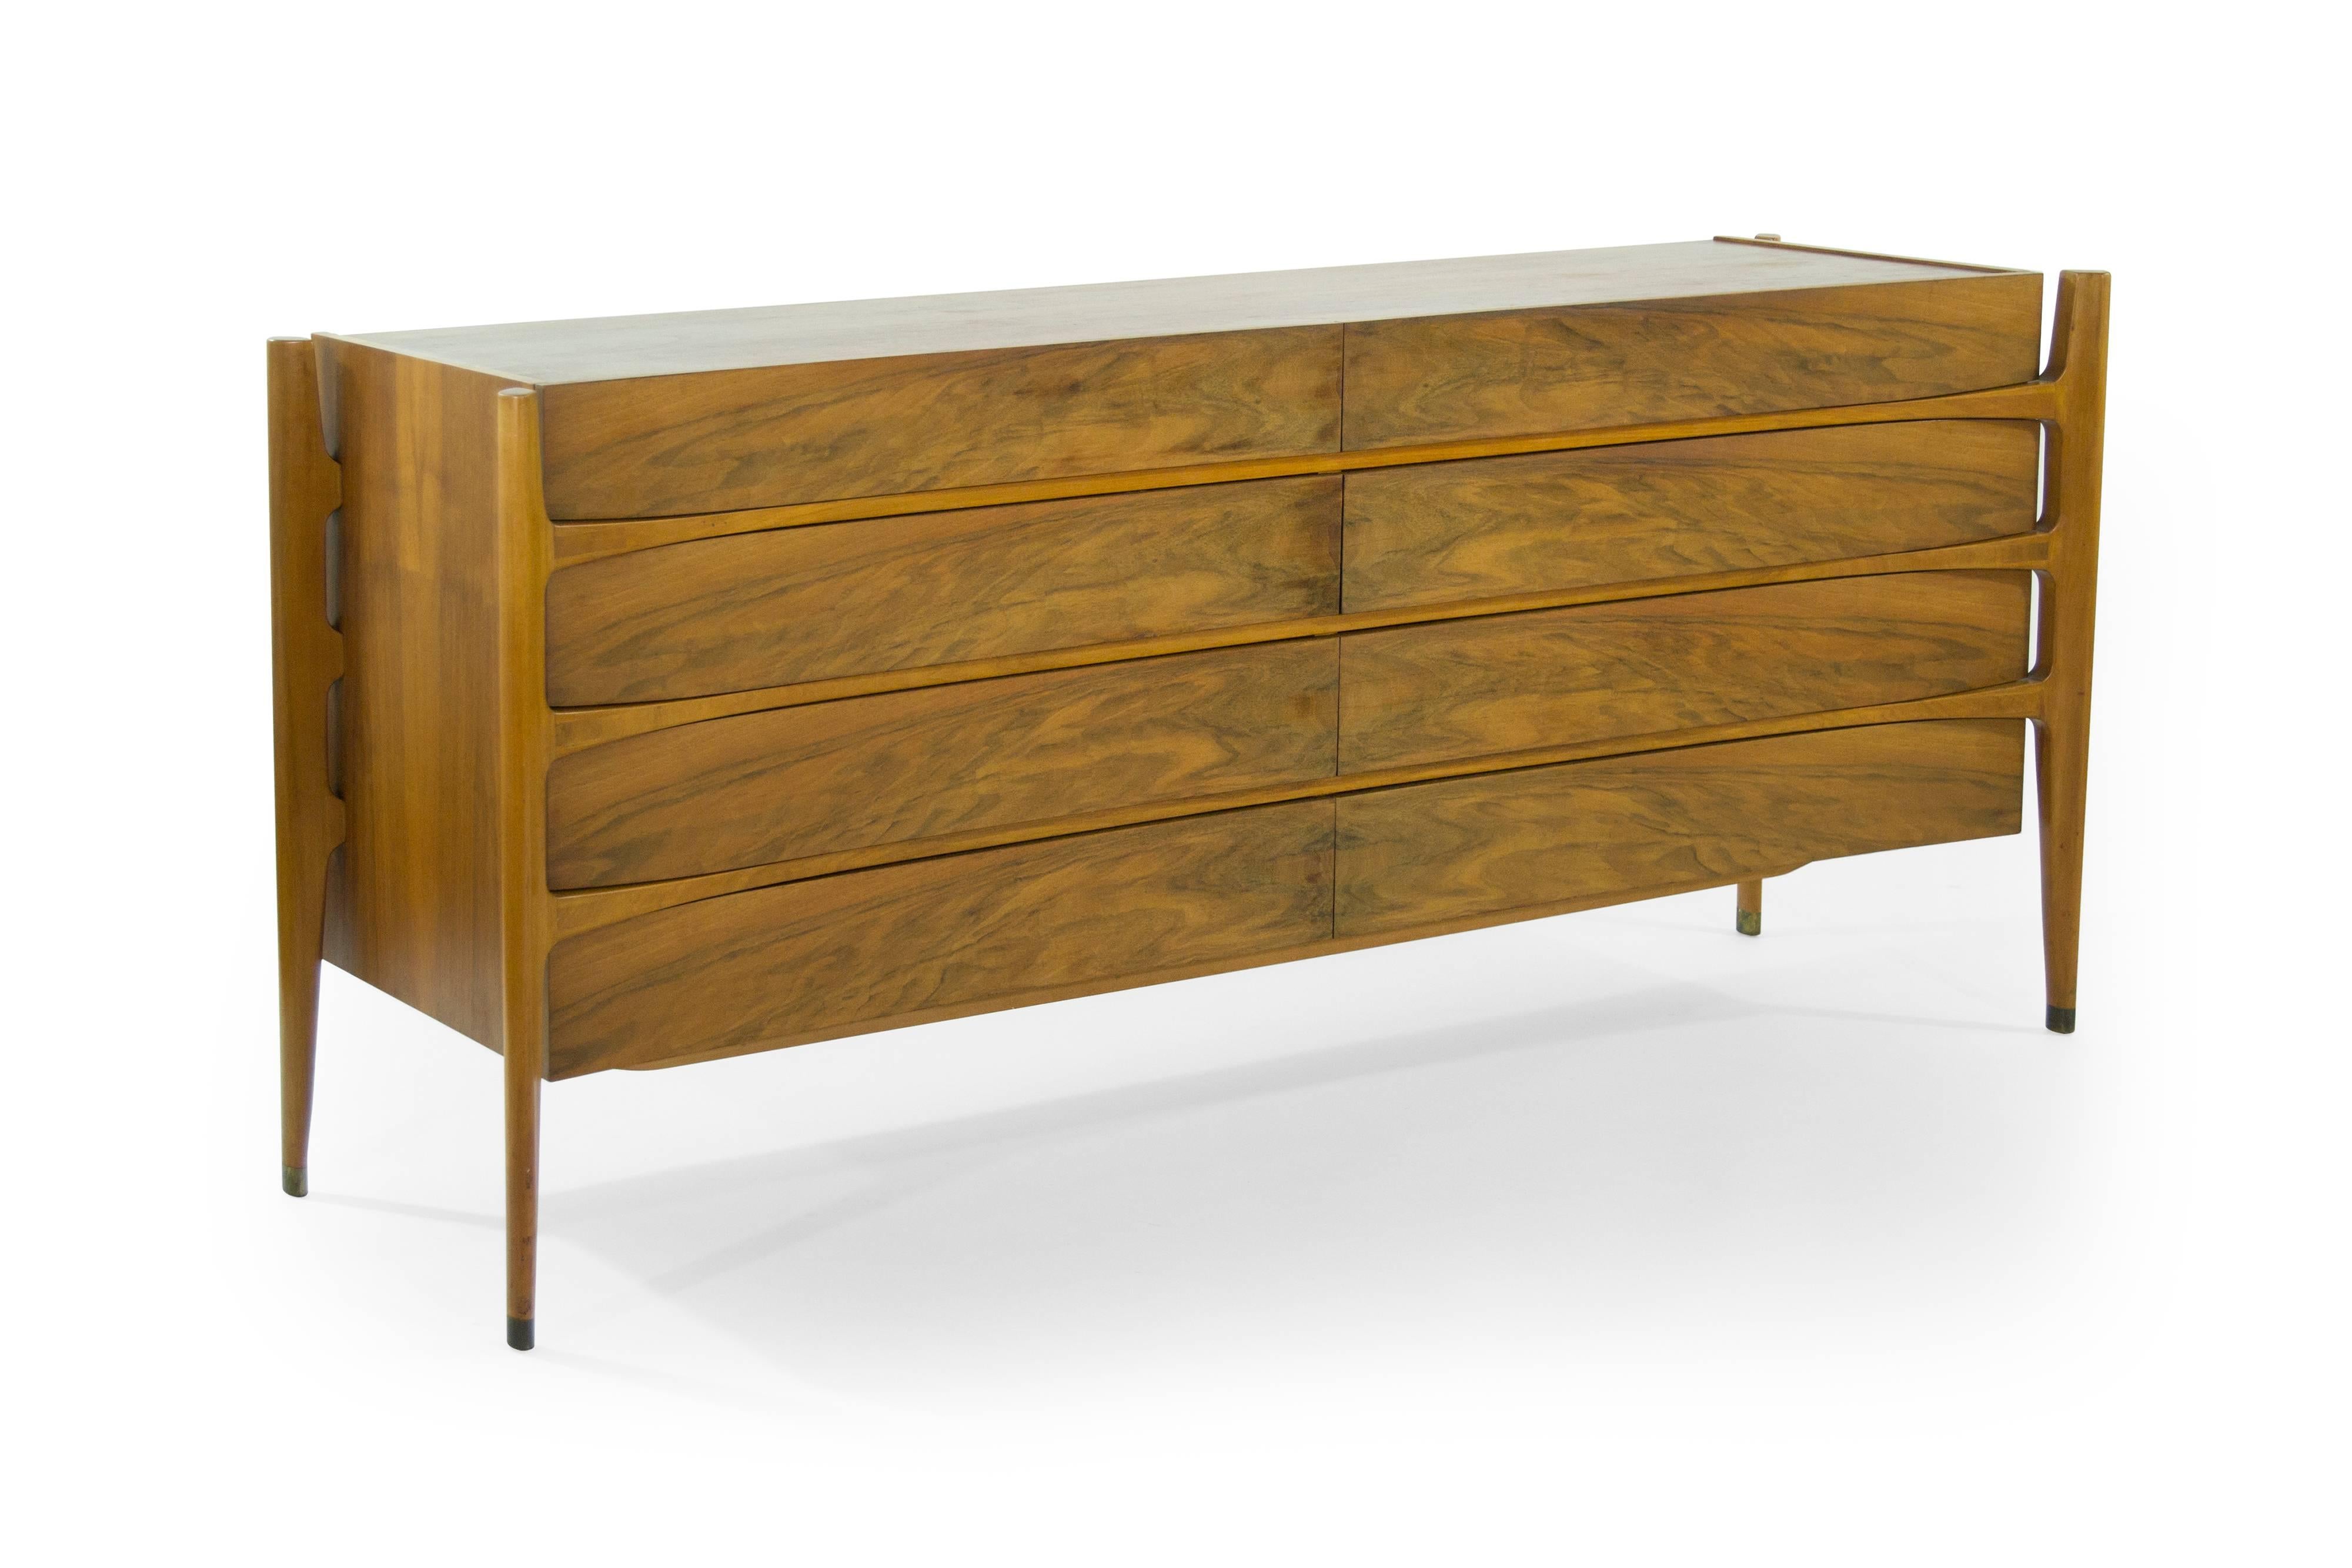 Extremely rare rosewood sideboard or dresser designed by Jorgen Clausen for Brande Møbelfabrik in excellent vintage condition.

Often misattributed to Edmond Spence. This particular piece features bookmatched drawers, exterior framing and brass